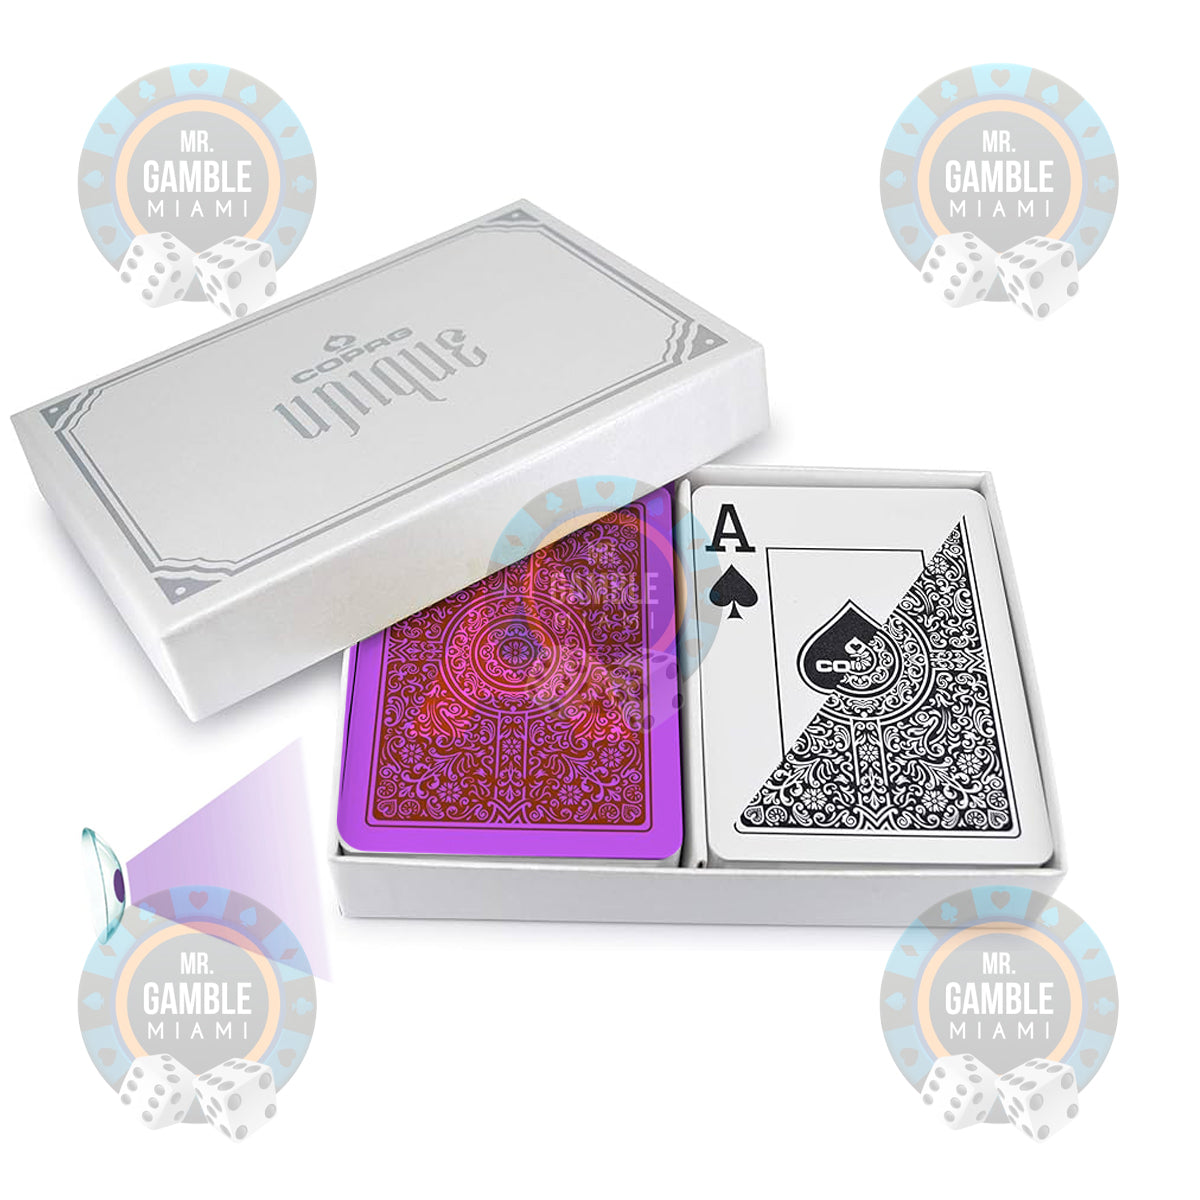 Copag Unique Poker Size Jumbo UV Marked Cards | Poker Cheating Devices